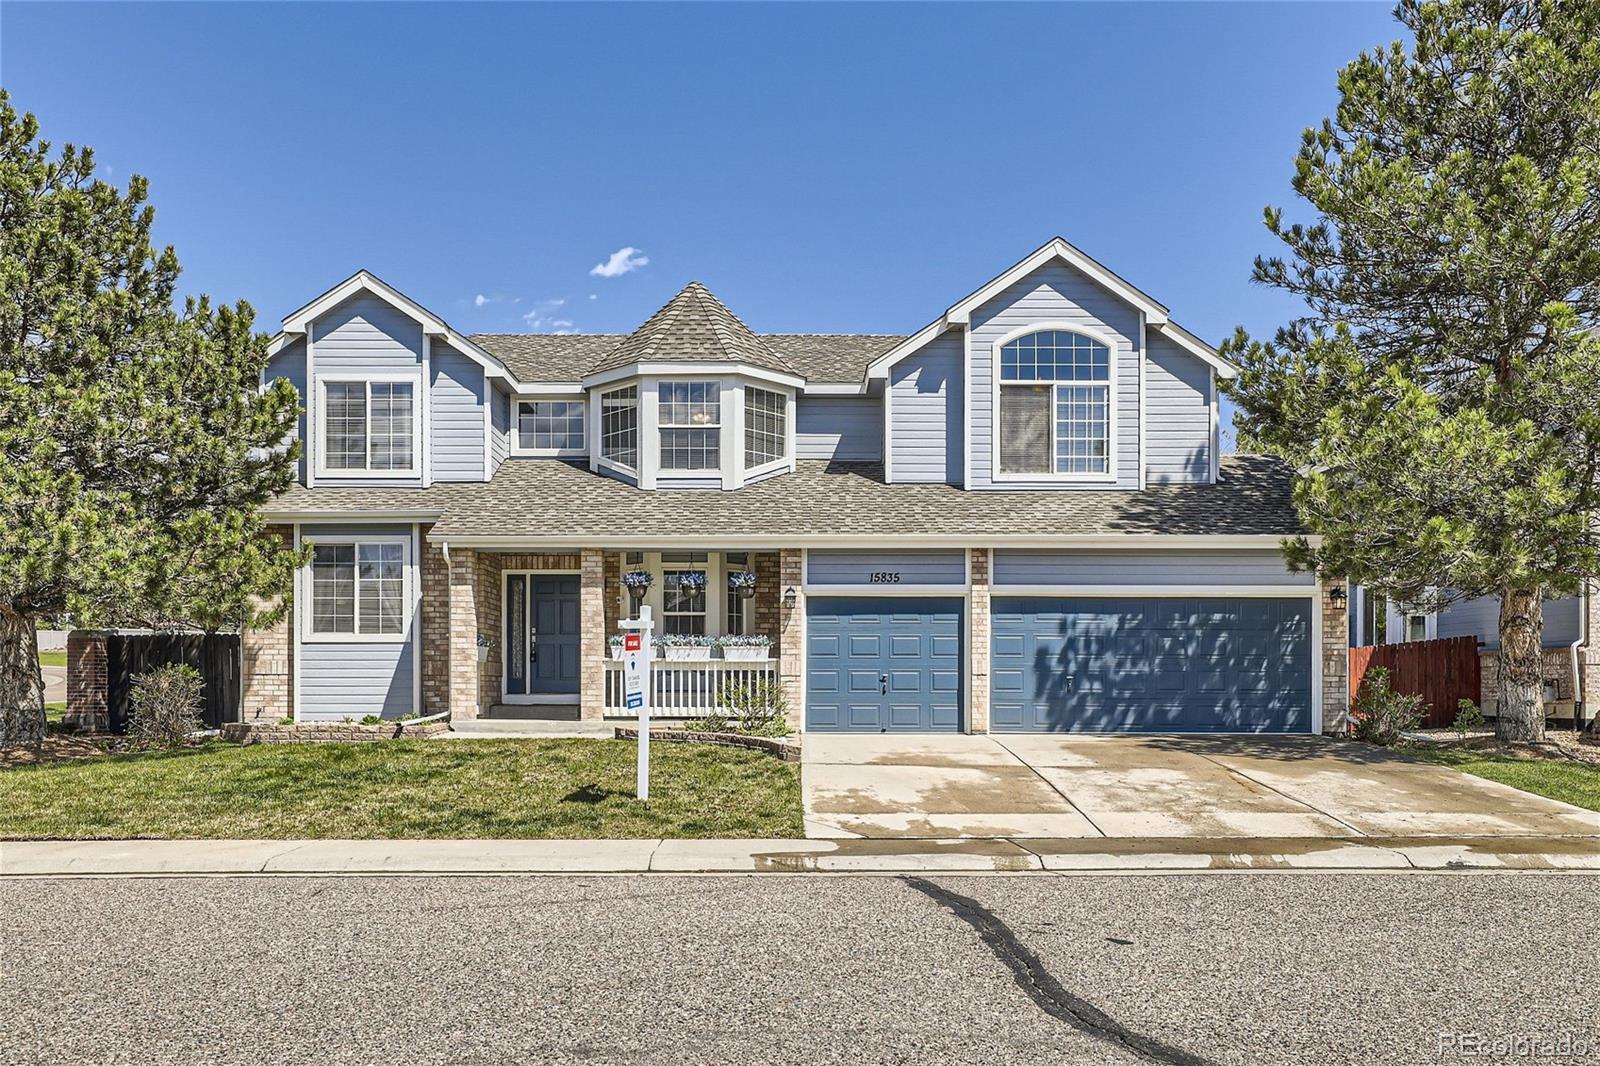 Photo one of 15835 W 71St Pl Arvada CO 80007 | MLS 9332333